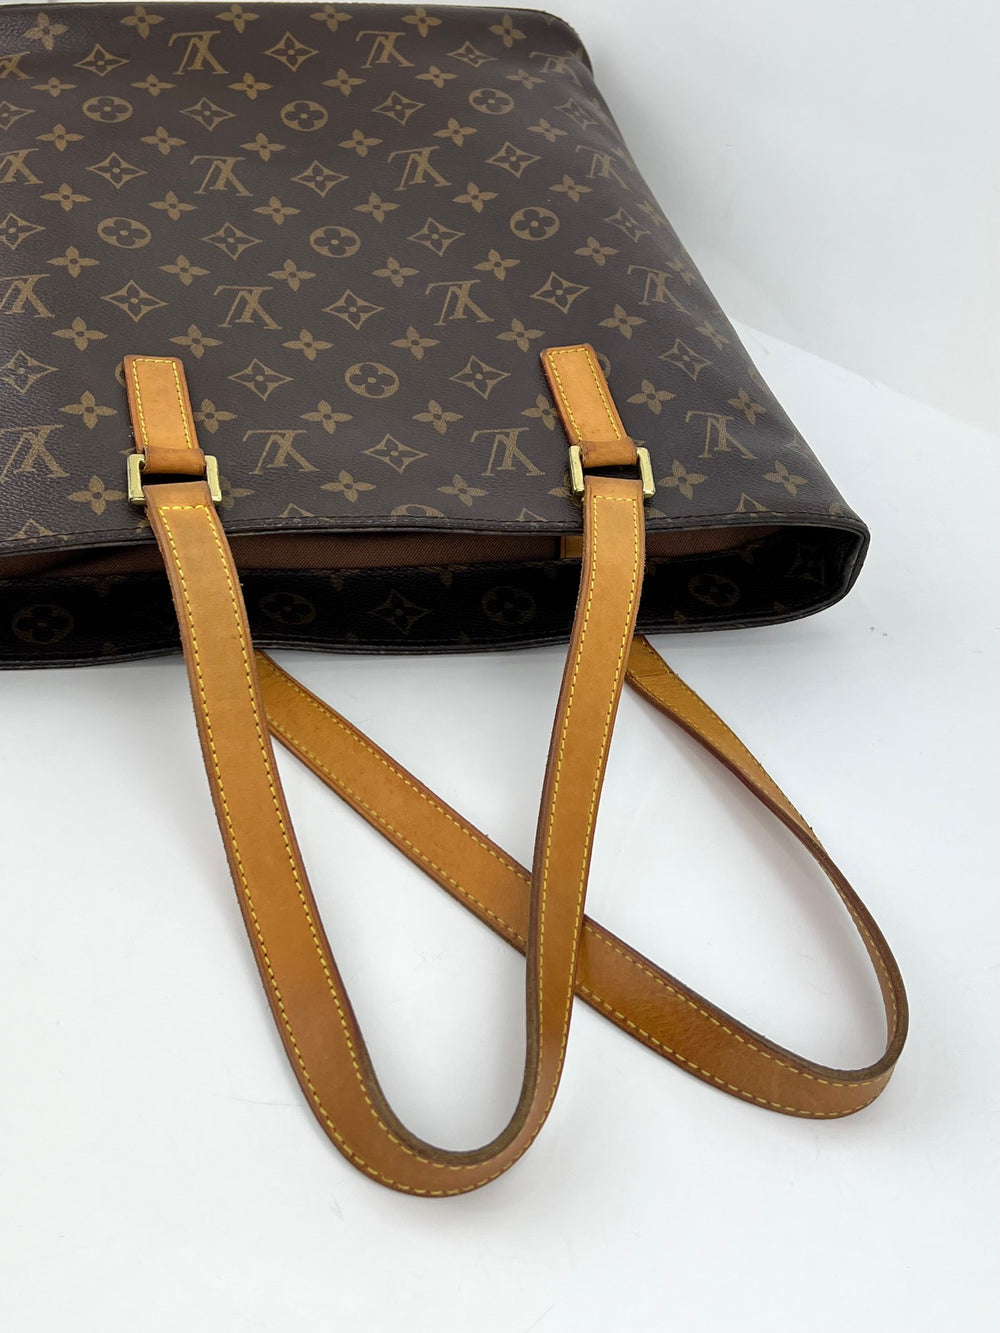 Authenticated Used LOUIS VUITTON Louis Vuitton Luco monogram tote